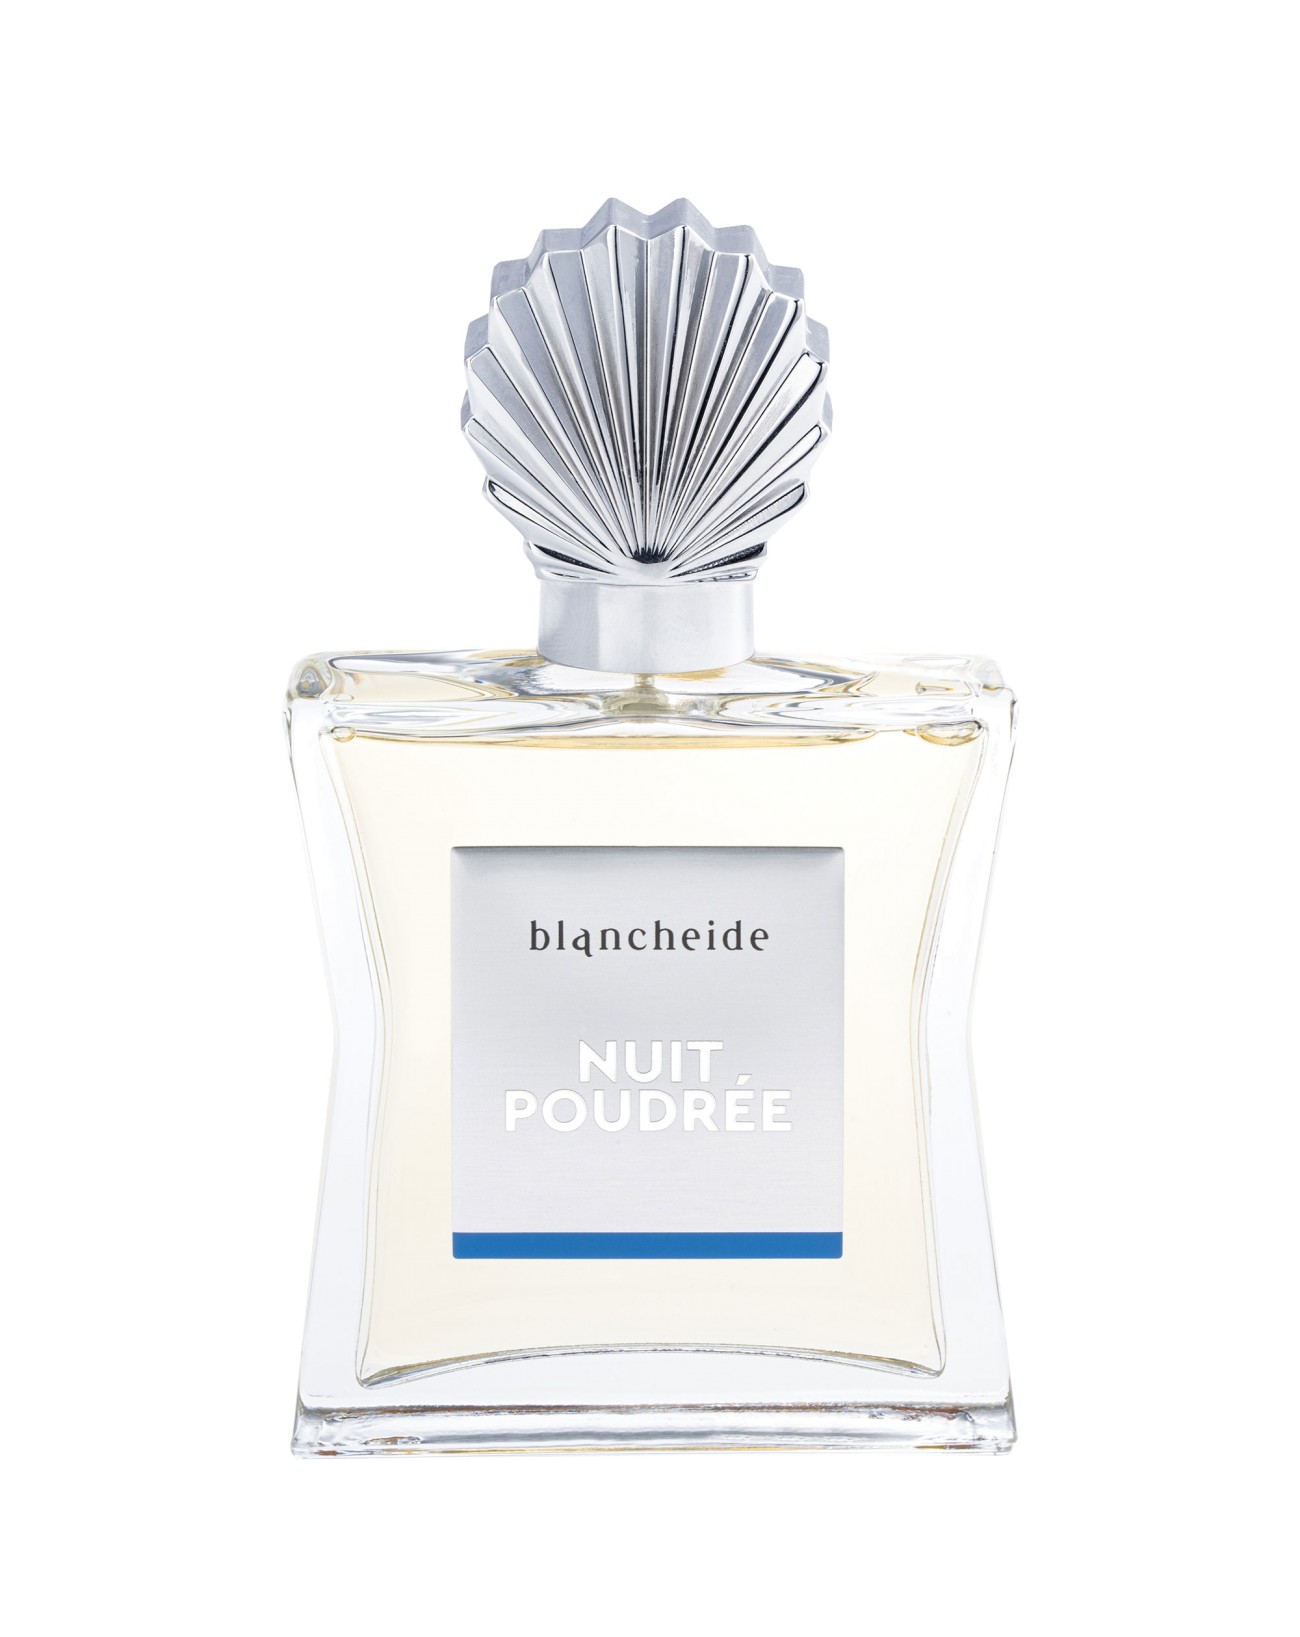 nuit-poudree-blancheide-bncnp-02